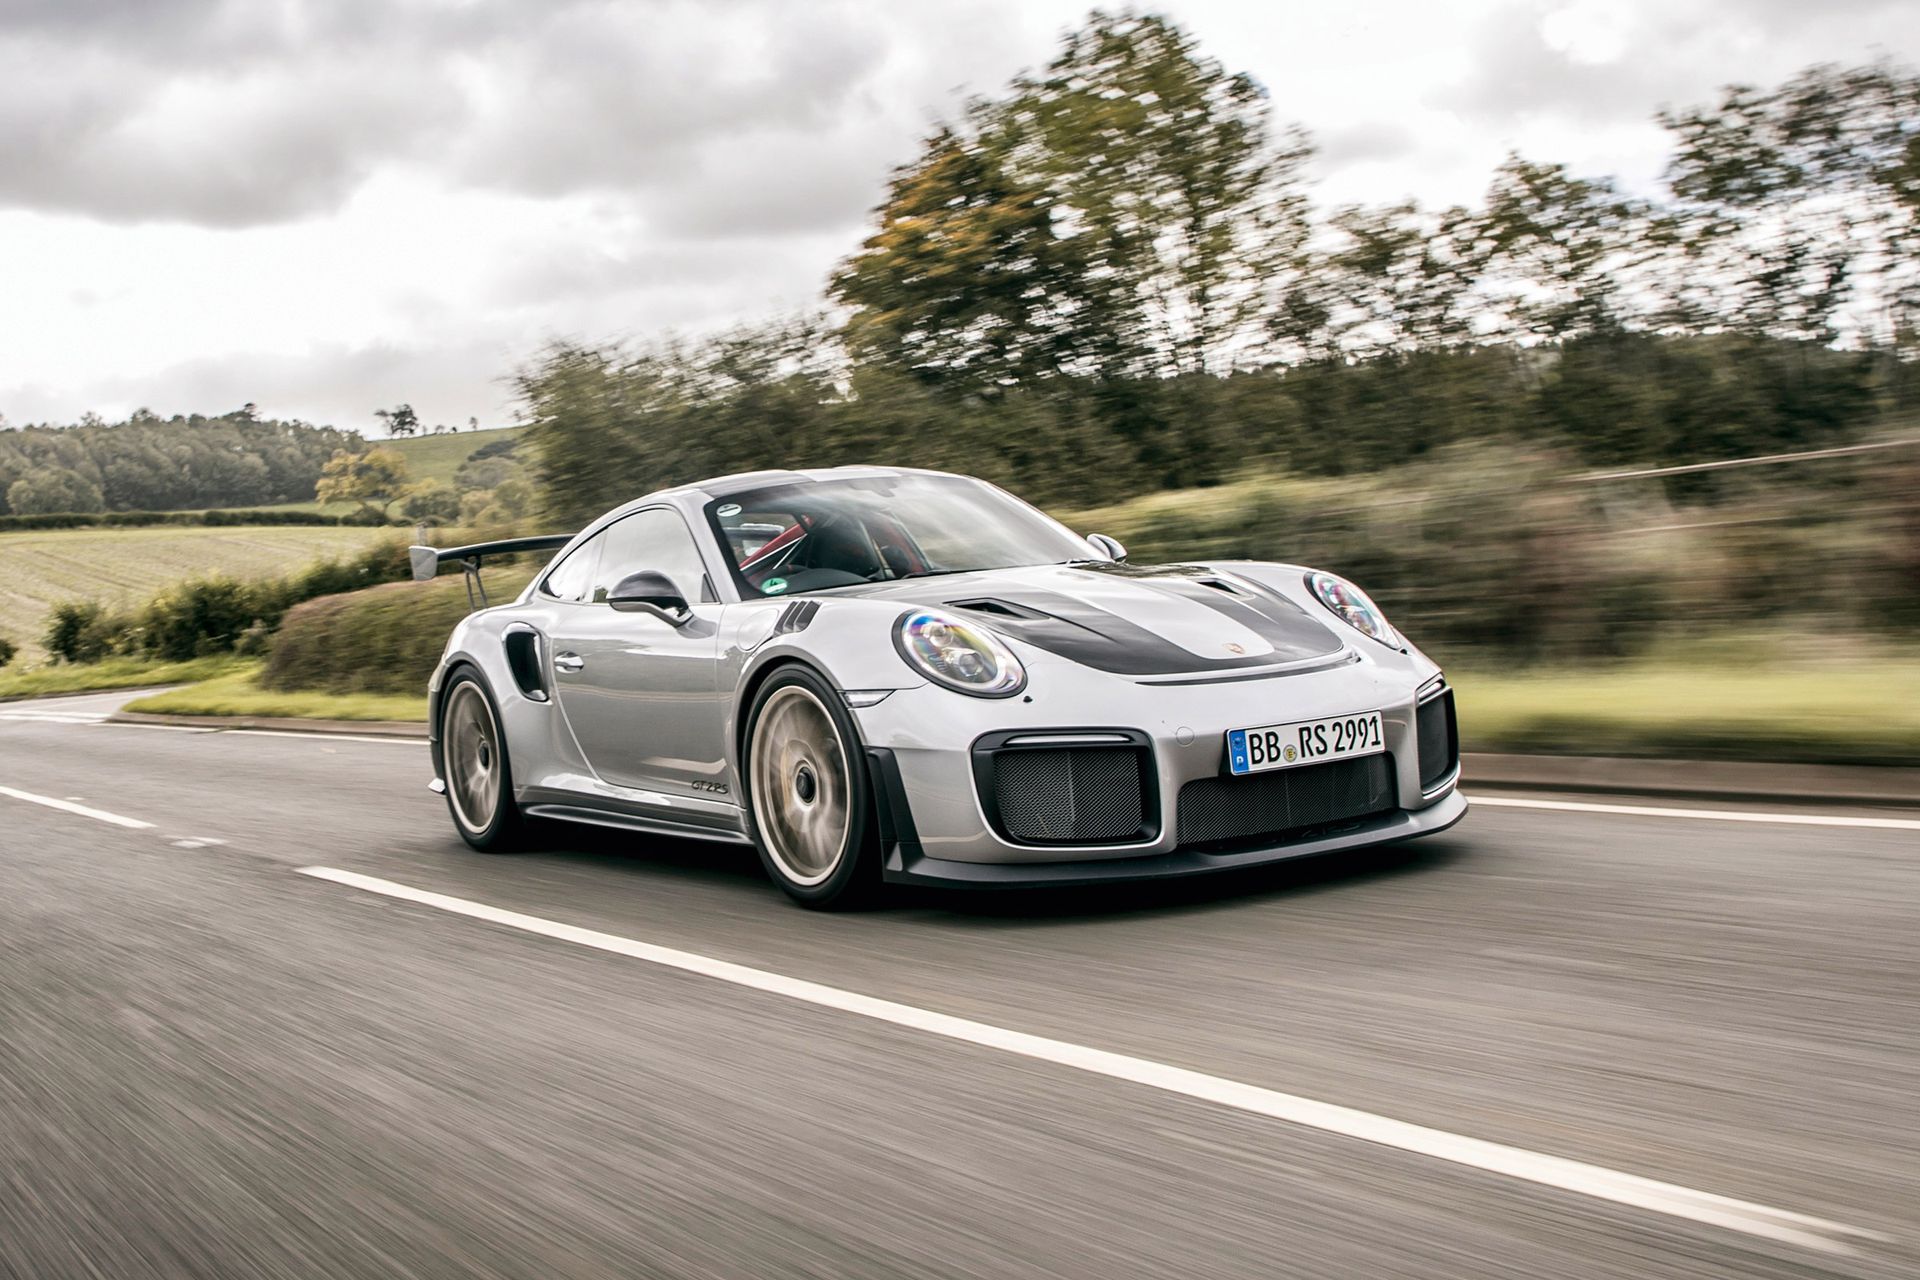 2026 Porsche 911 GT2 RS will be a hybrid supercar with 700+ bhp -report